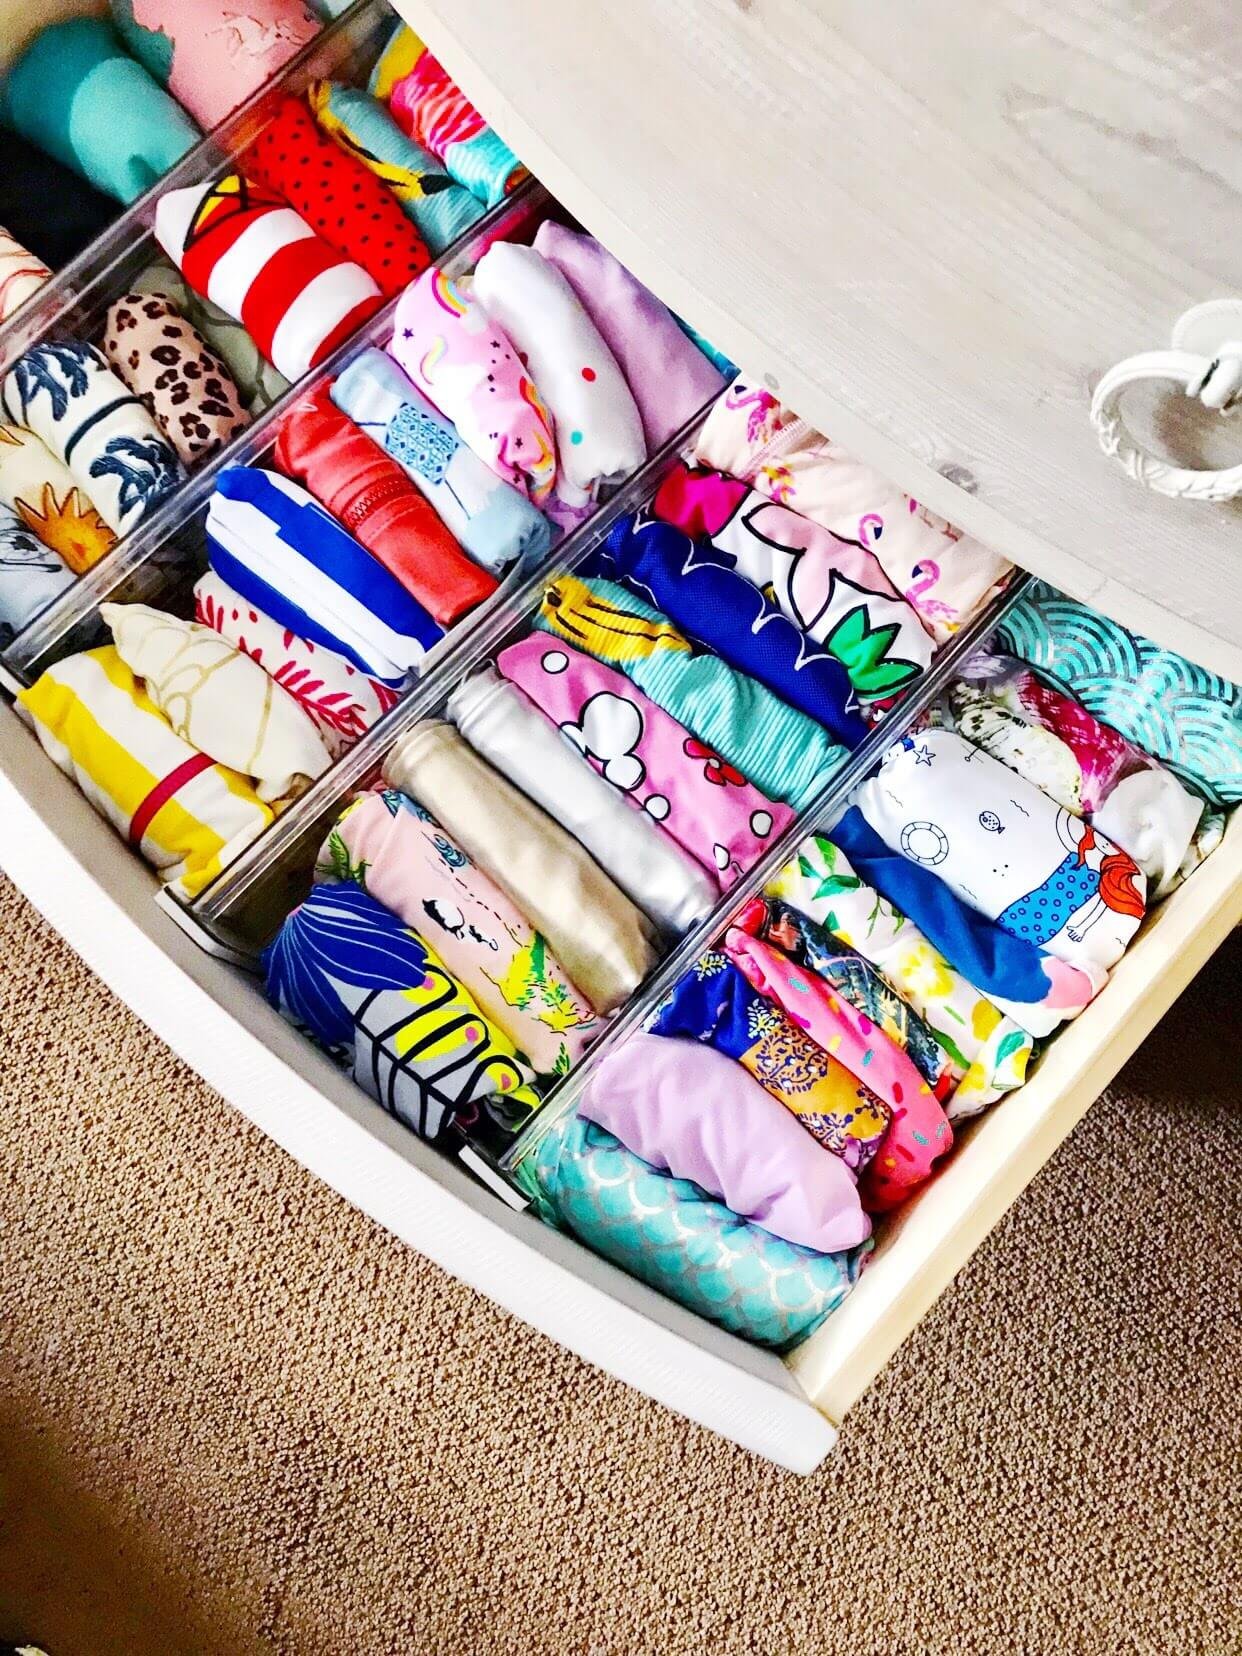 Kid's Clothes Neatly Folded In Dresser Drawer